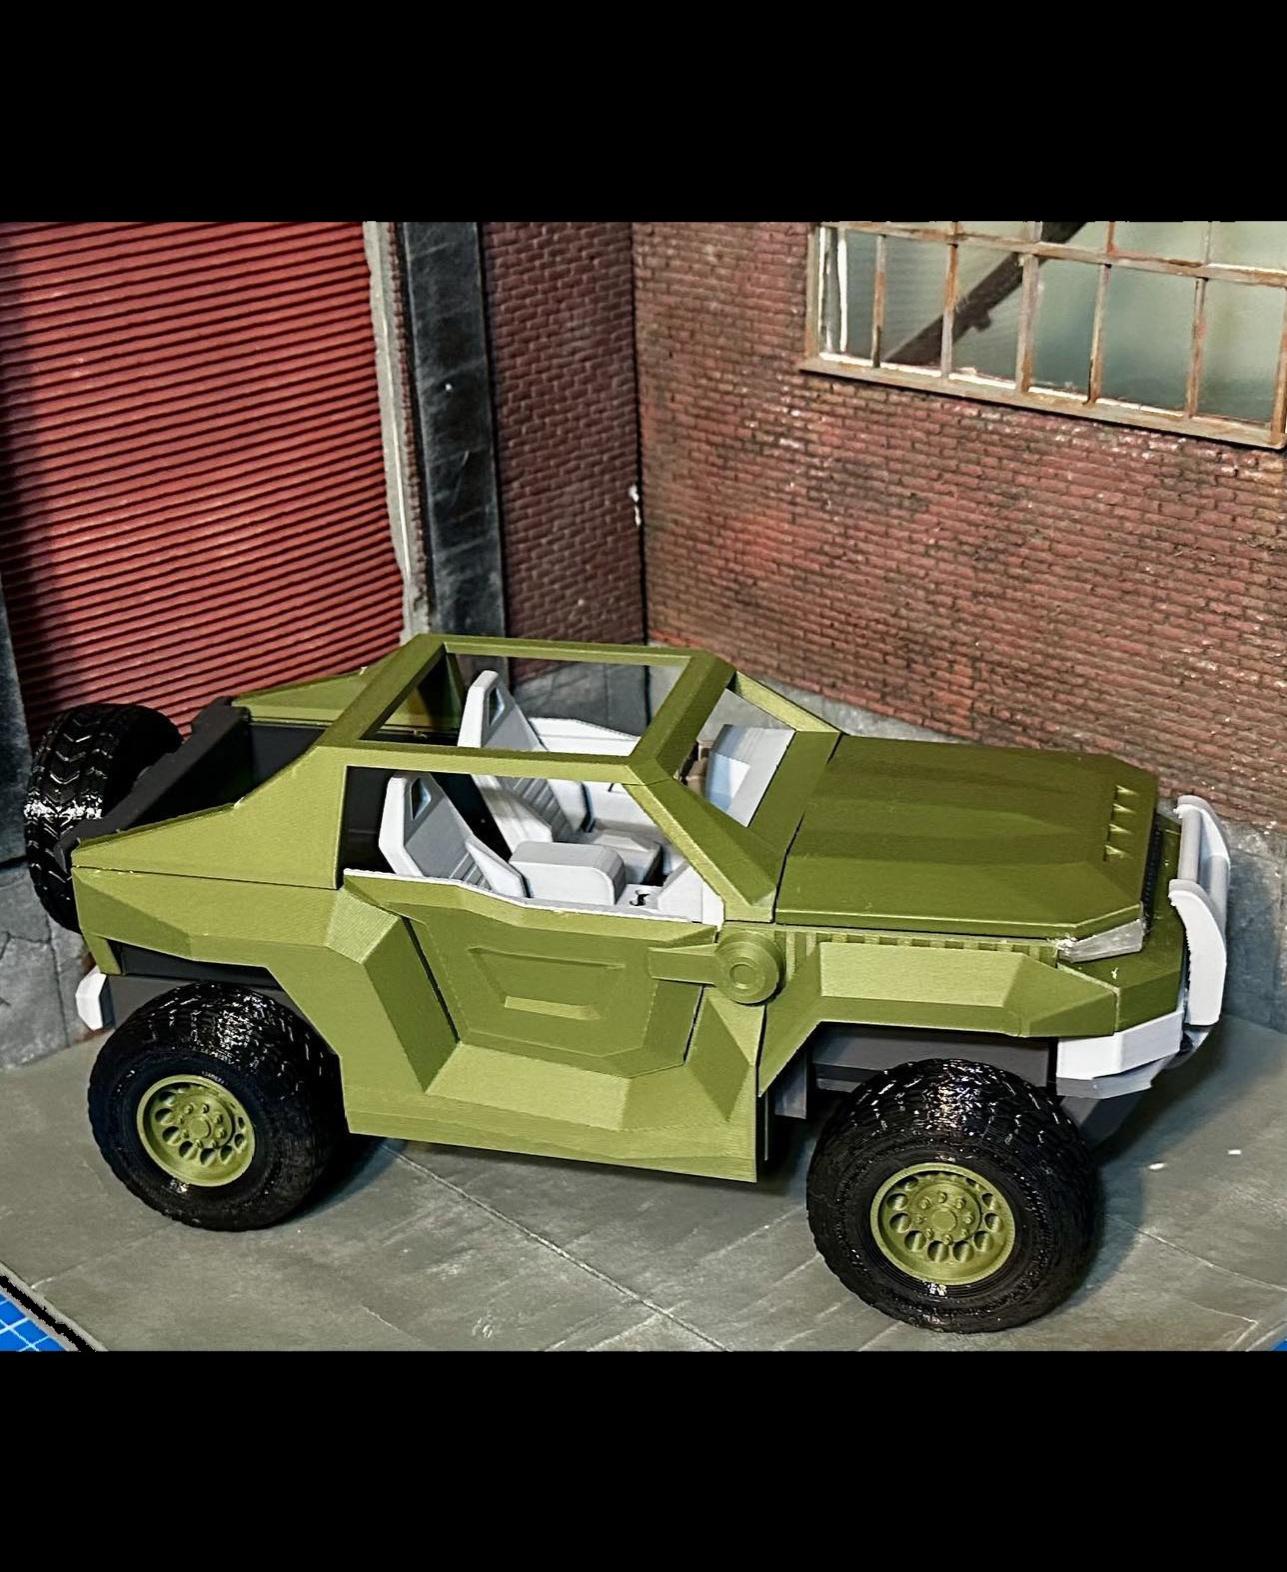 VSV (Variable Support Vehicle) mkII - The VSV mkII prototype in all its glory. - 3d model